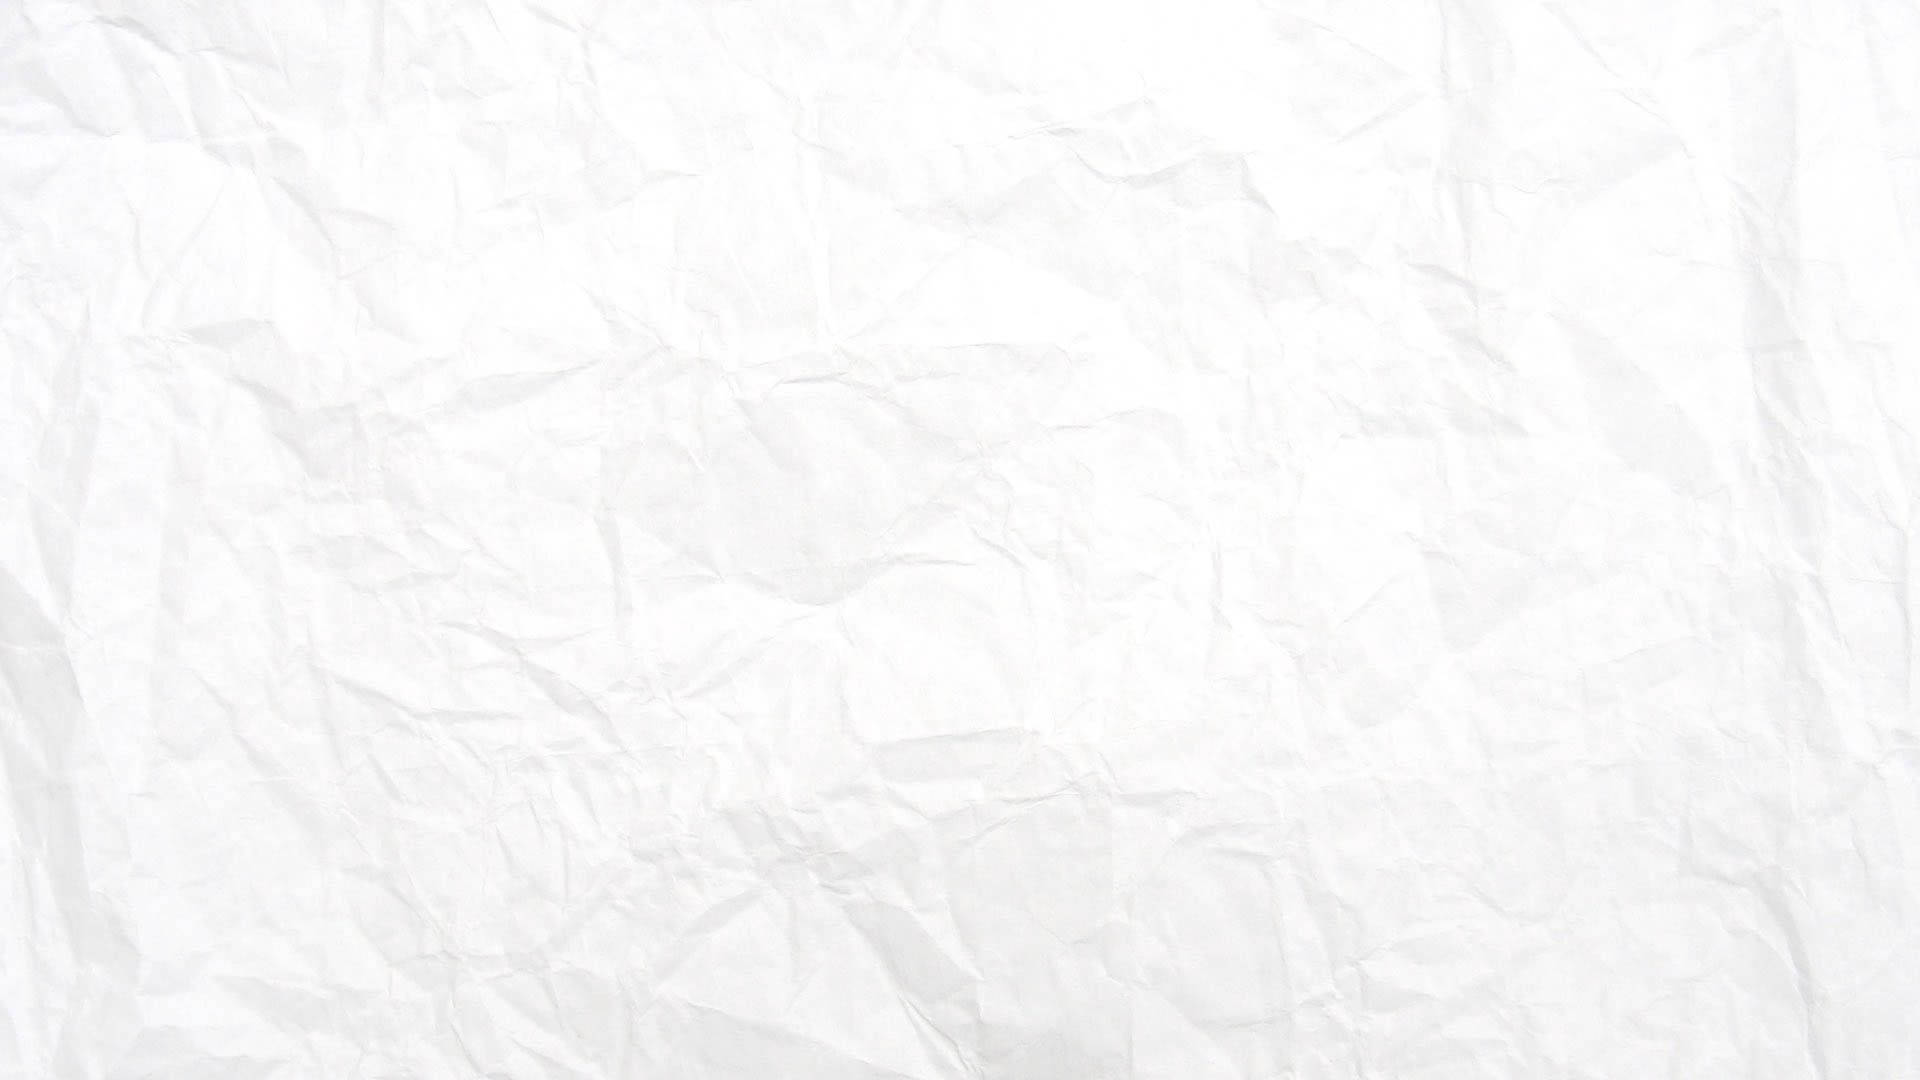 Blank White Crumpled Paper Picture